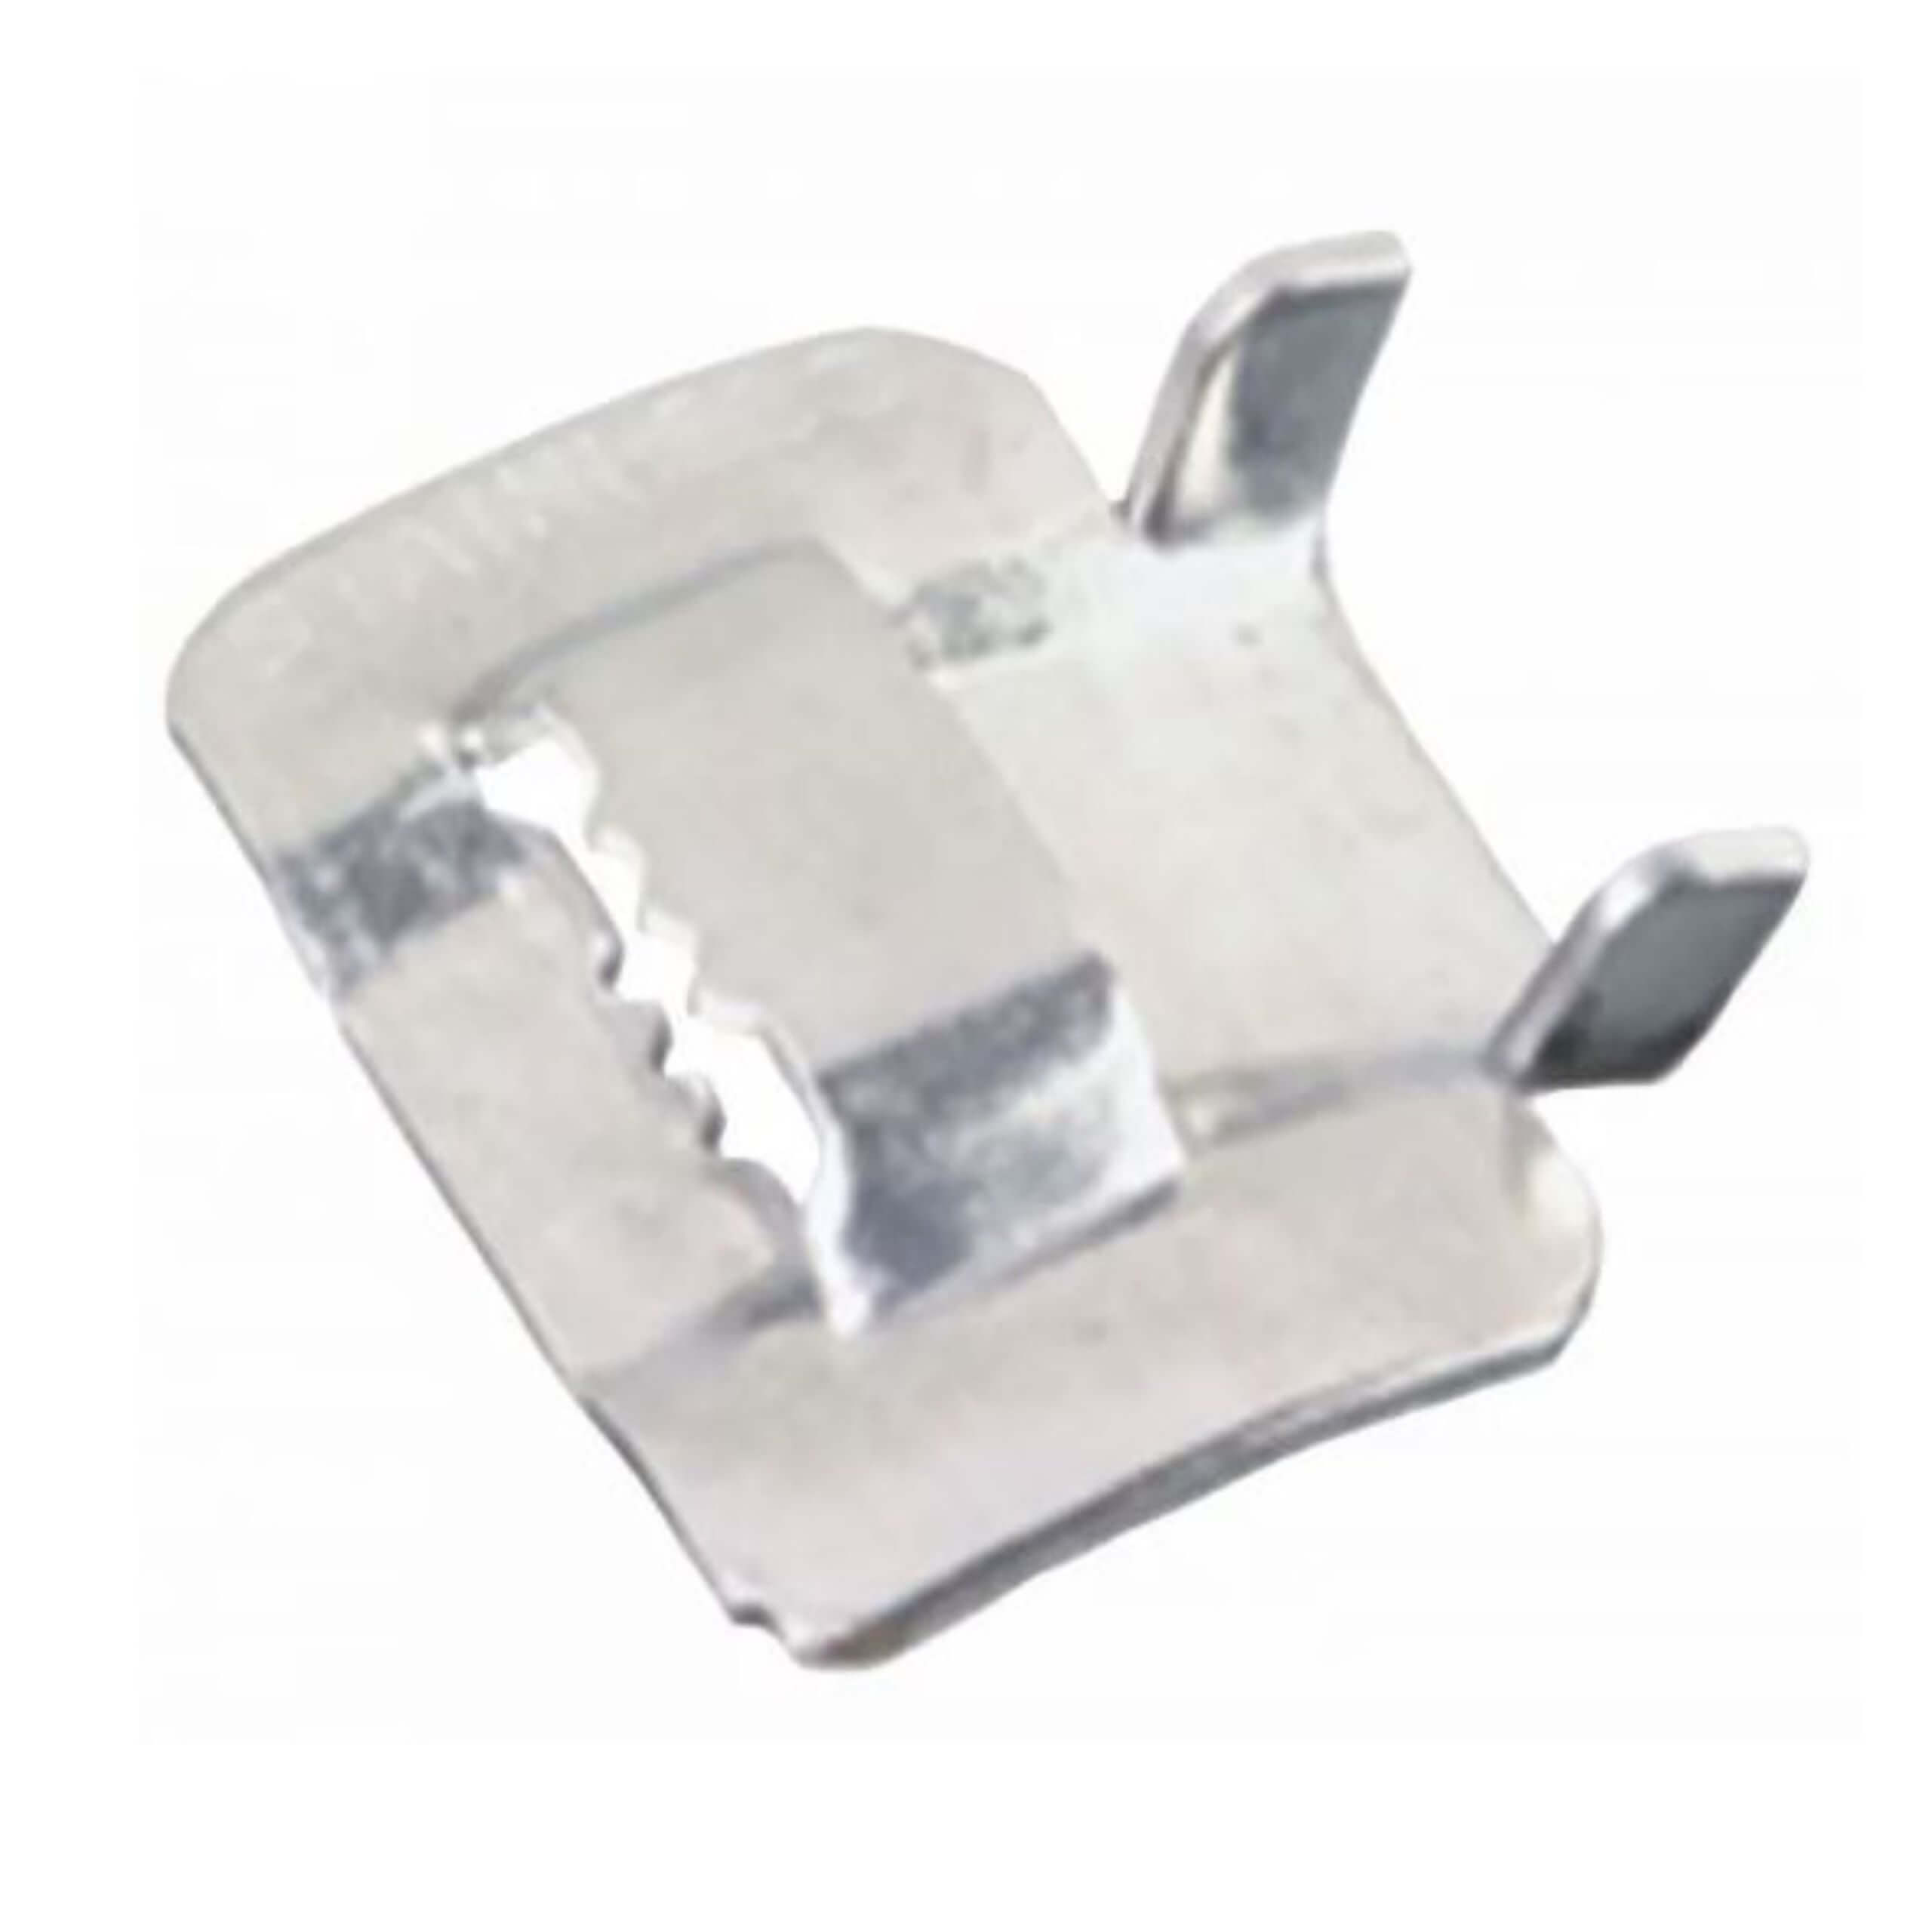 An image of our Stainless Steel Buckles for Strapping.